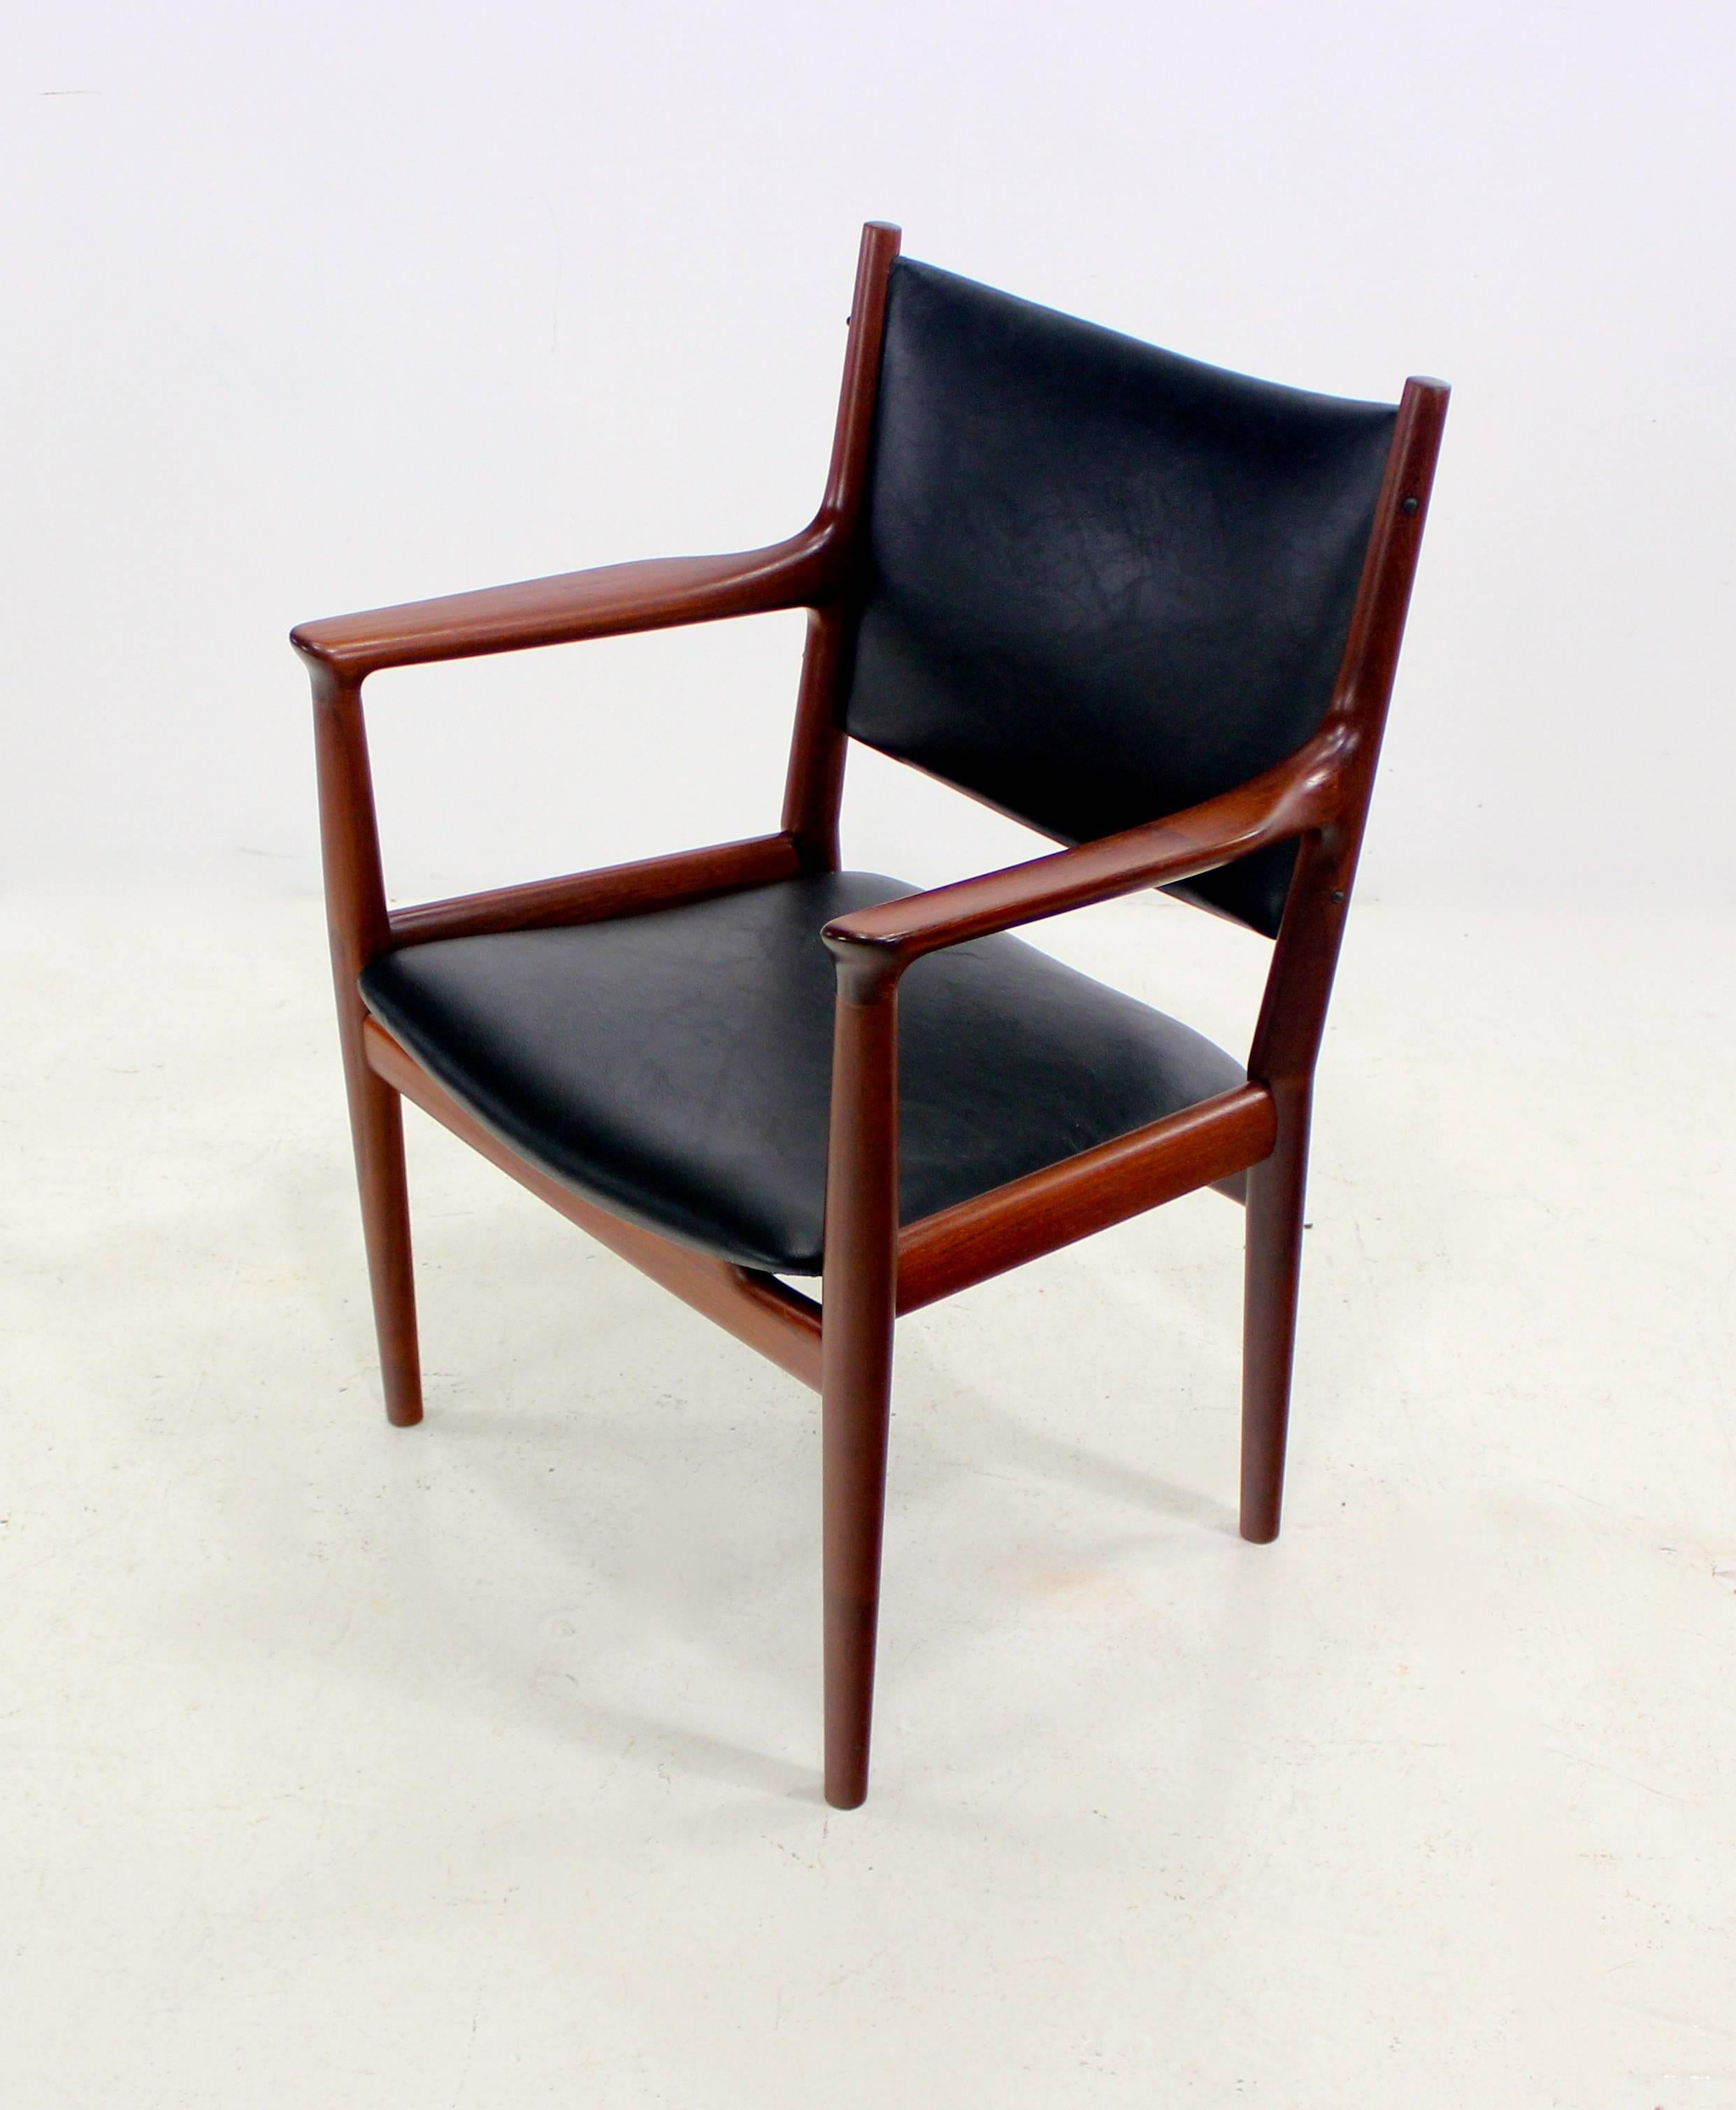 Very Rare Pair of Danish Modern Armchairs Designed by Hans Wegner In Excellent Condition For Sale In Portland, OR